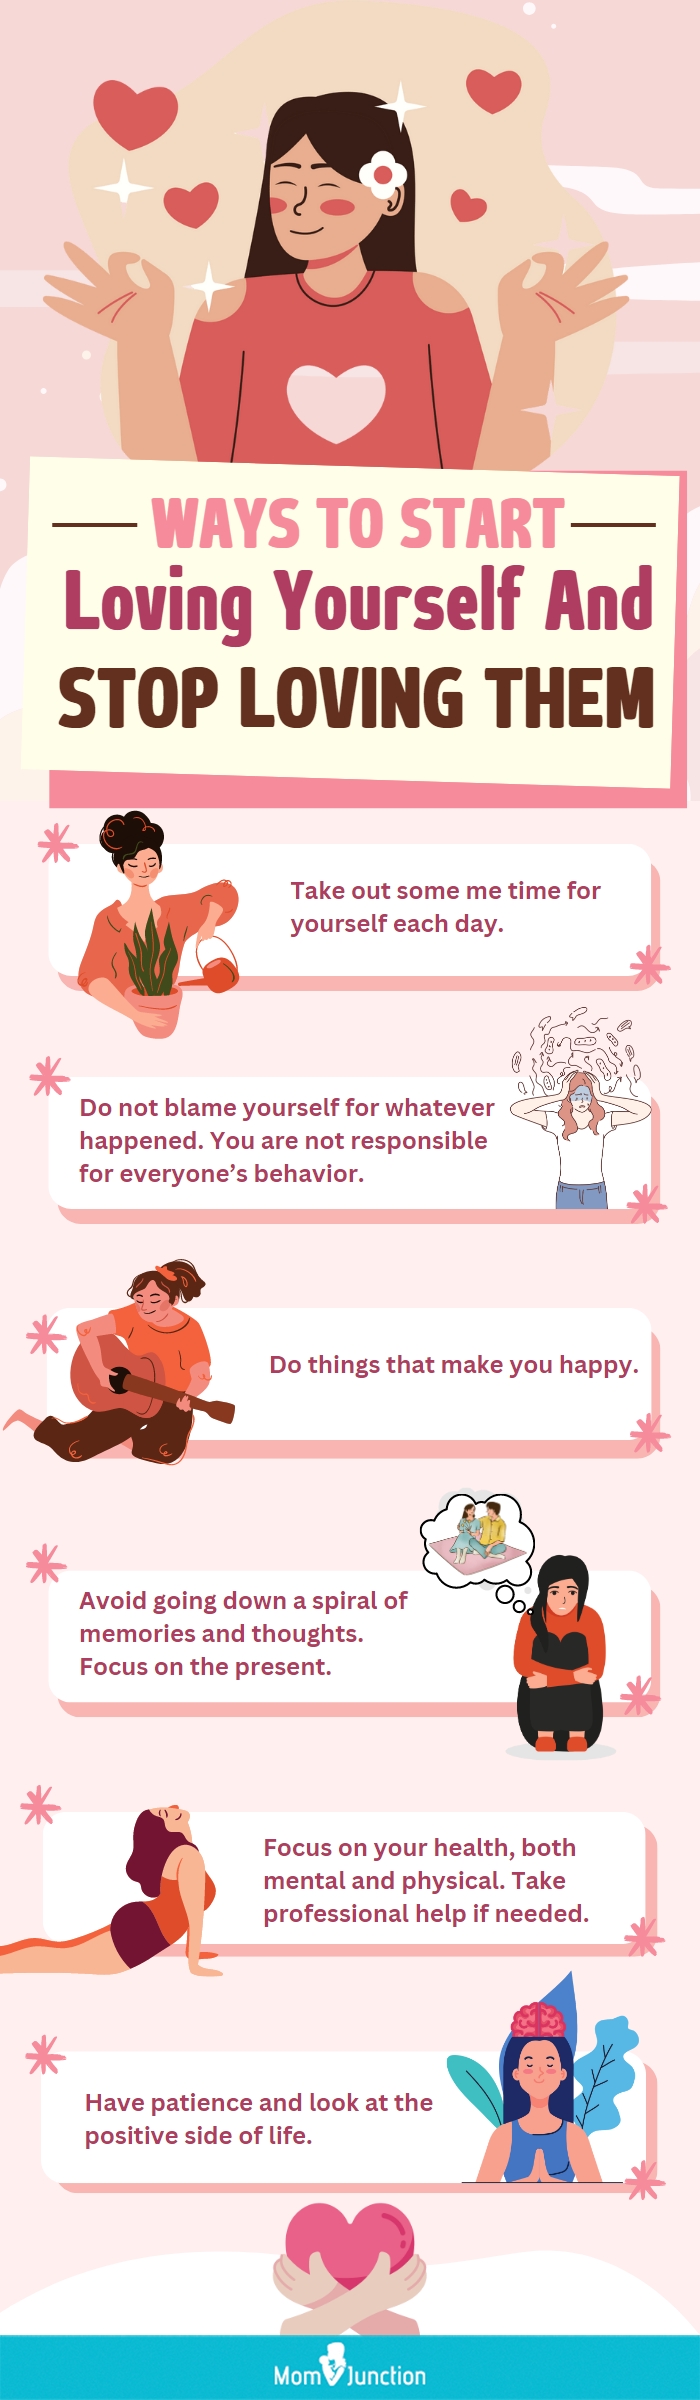 ways to start loving yourself (infographic)